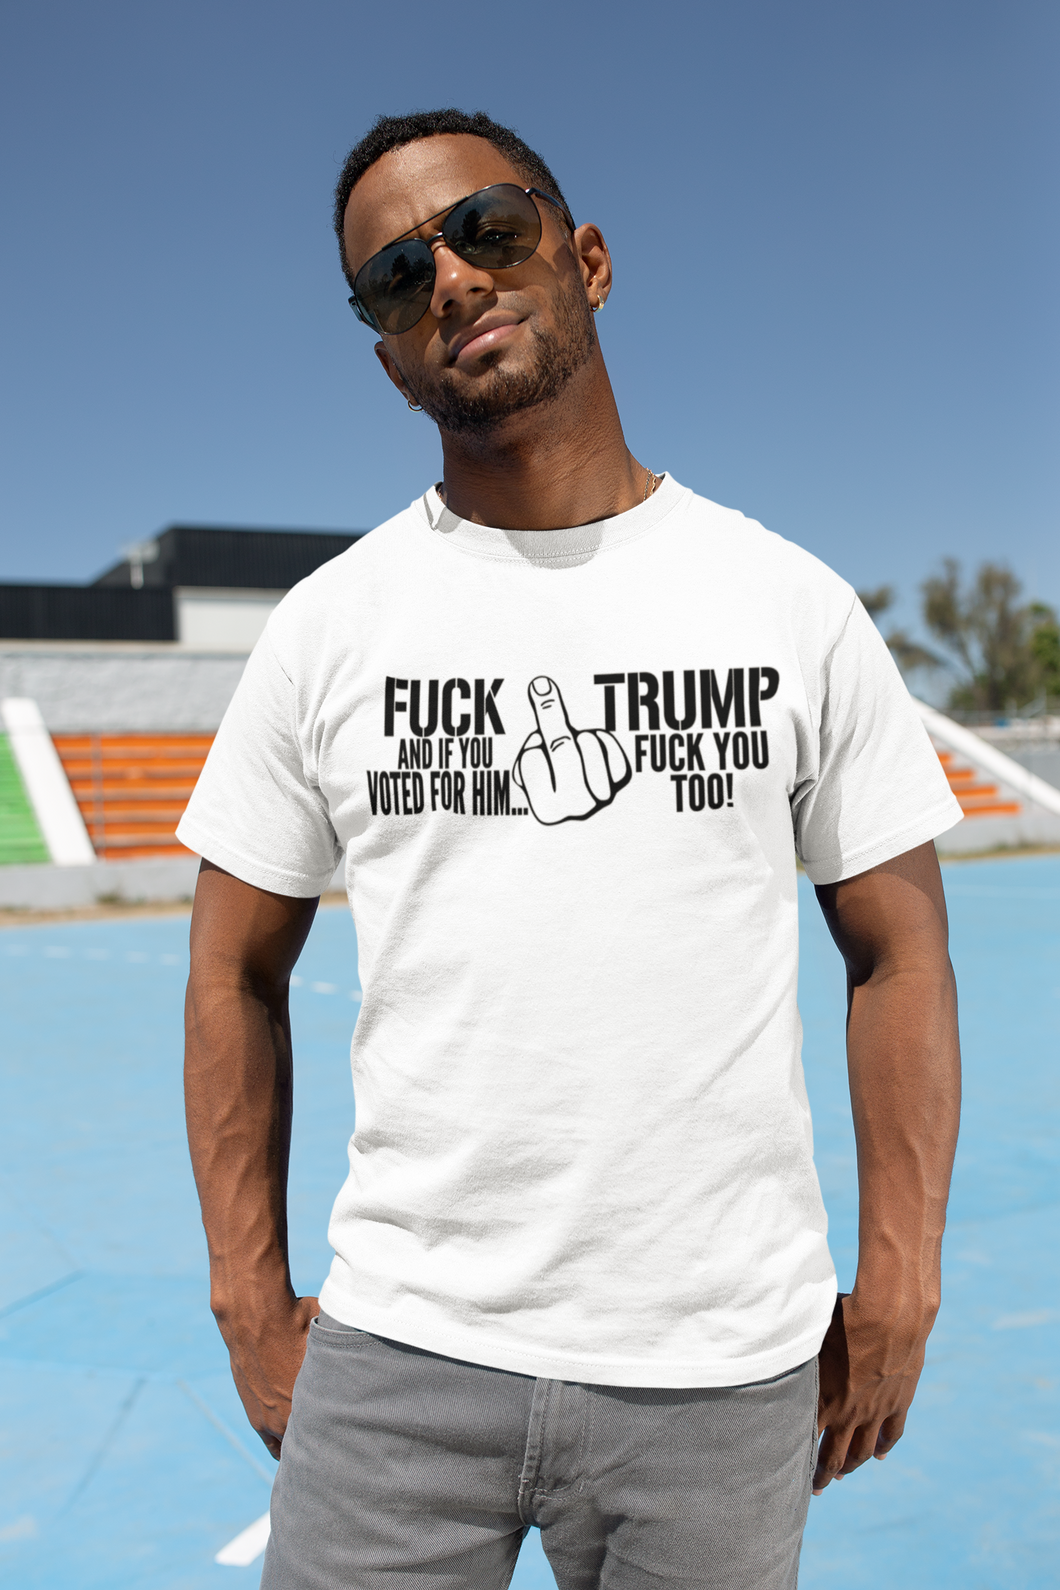 FUCK TRUMP ... And If You Voted For Him FUCK YOU TOO!